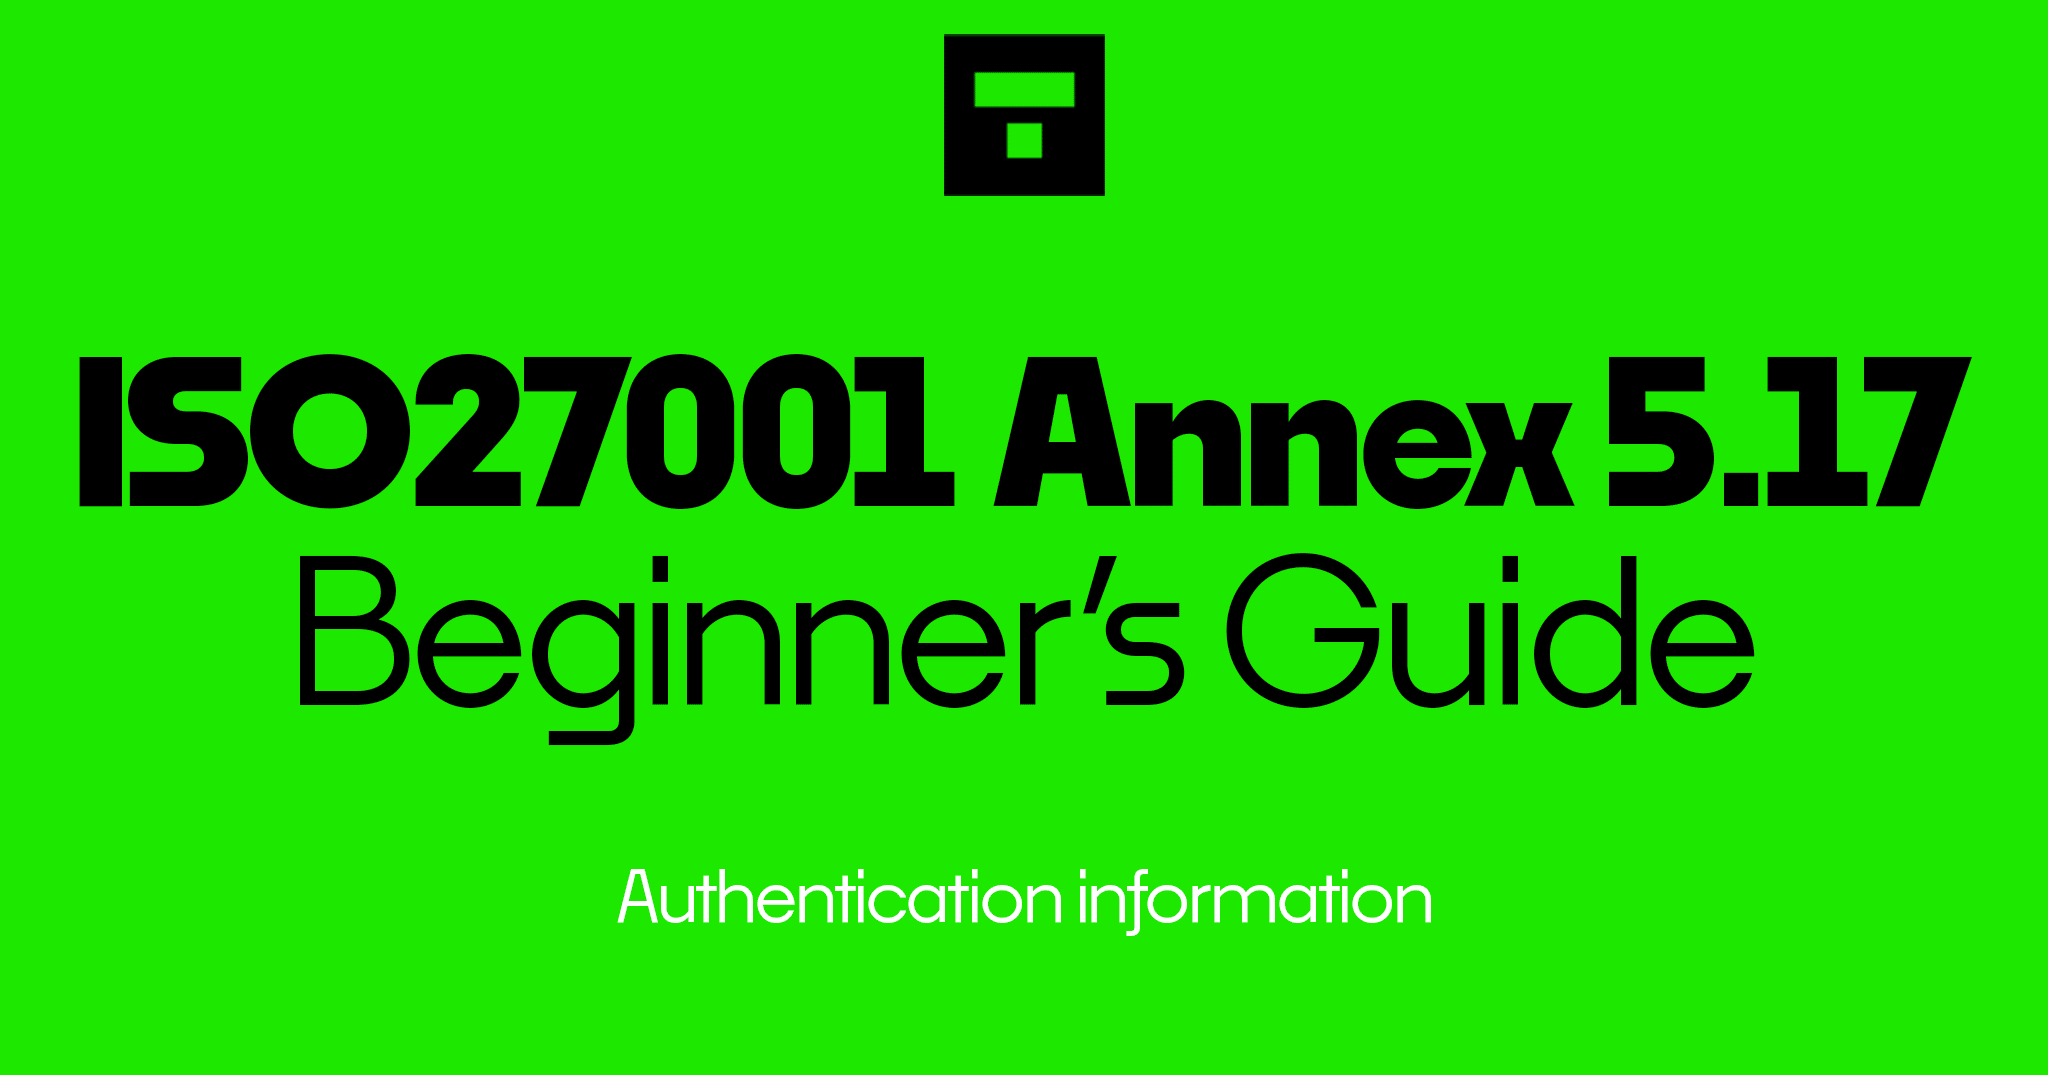 How To Implement ISO 27001 Annex A 5.17 Authentication Information